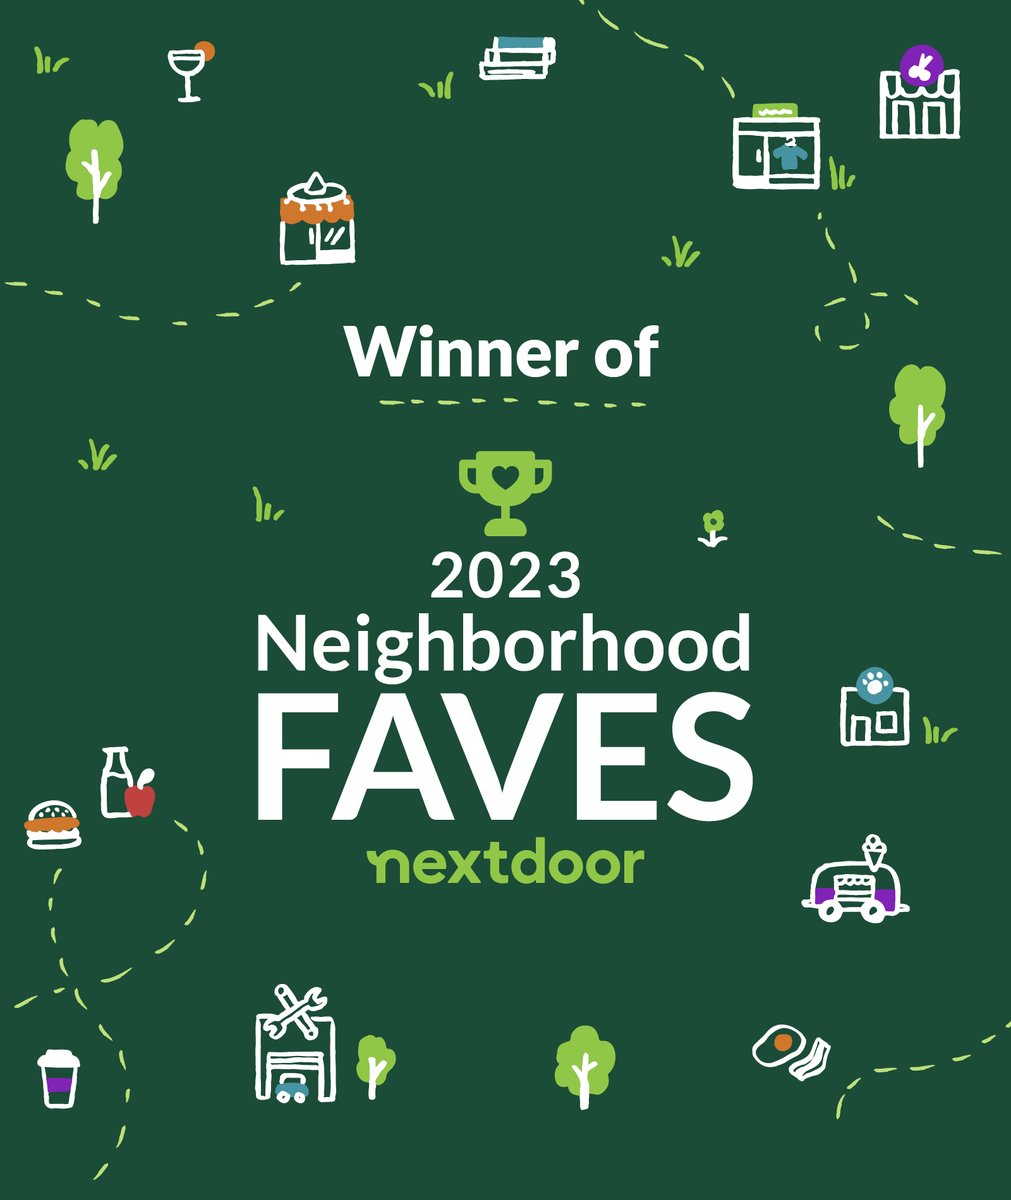 Thank you to our neighbors! We are honored to be voted a 2023 Nextdoor Neighborhood Fave. Be sure to visit us on @Nextdoor and leave a recommendation: https://t.co/AaMe9BZrDq
 #NeighborhoodFaves https://t.co/VZQduL4LdR